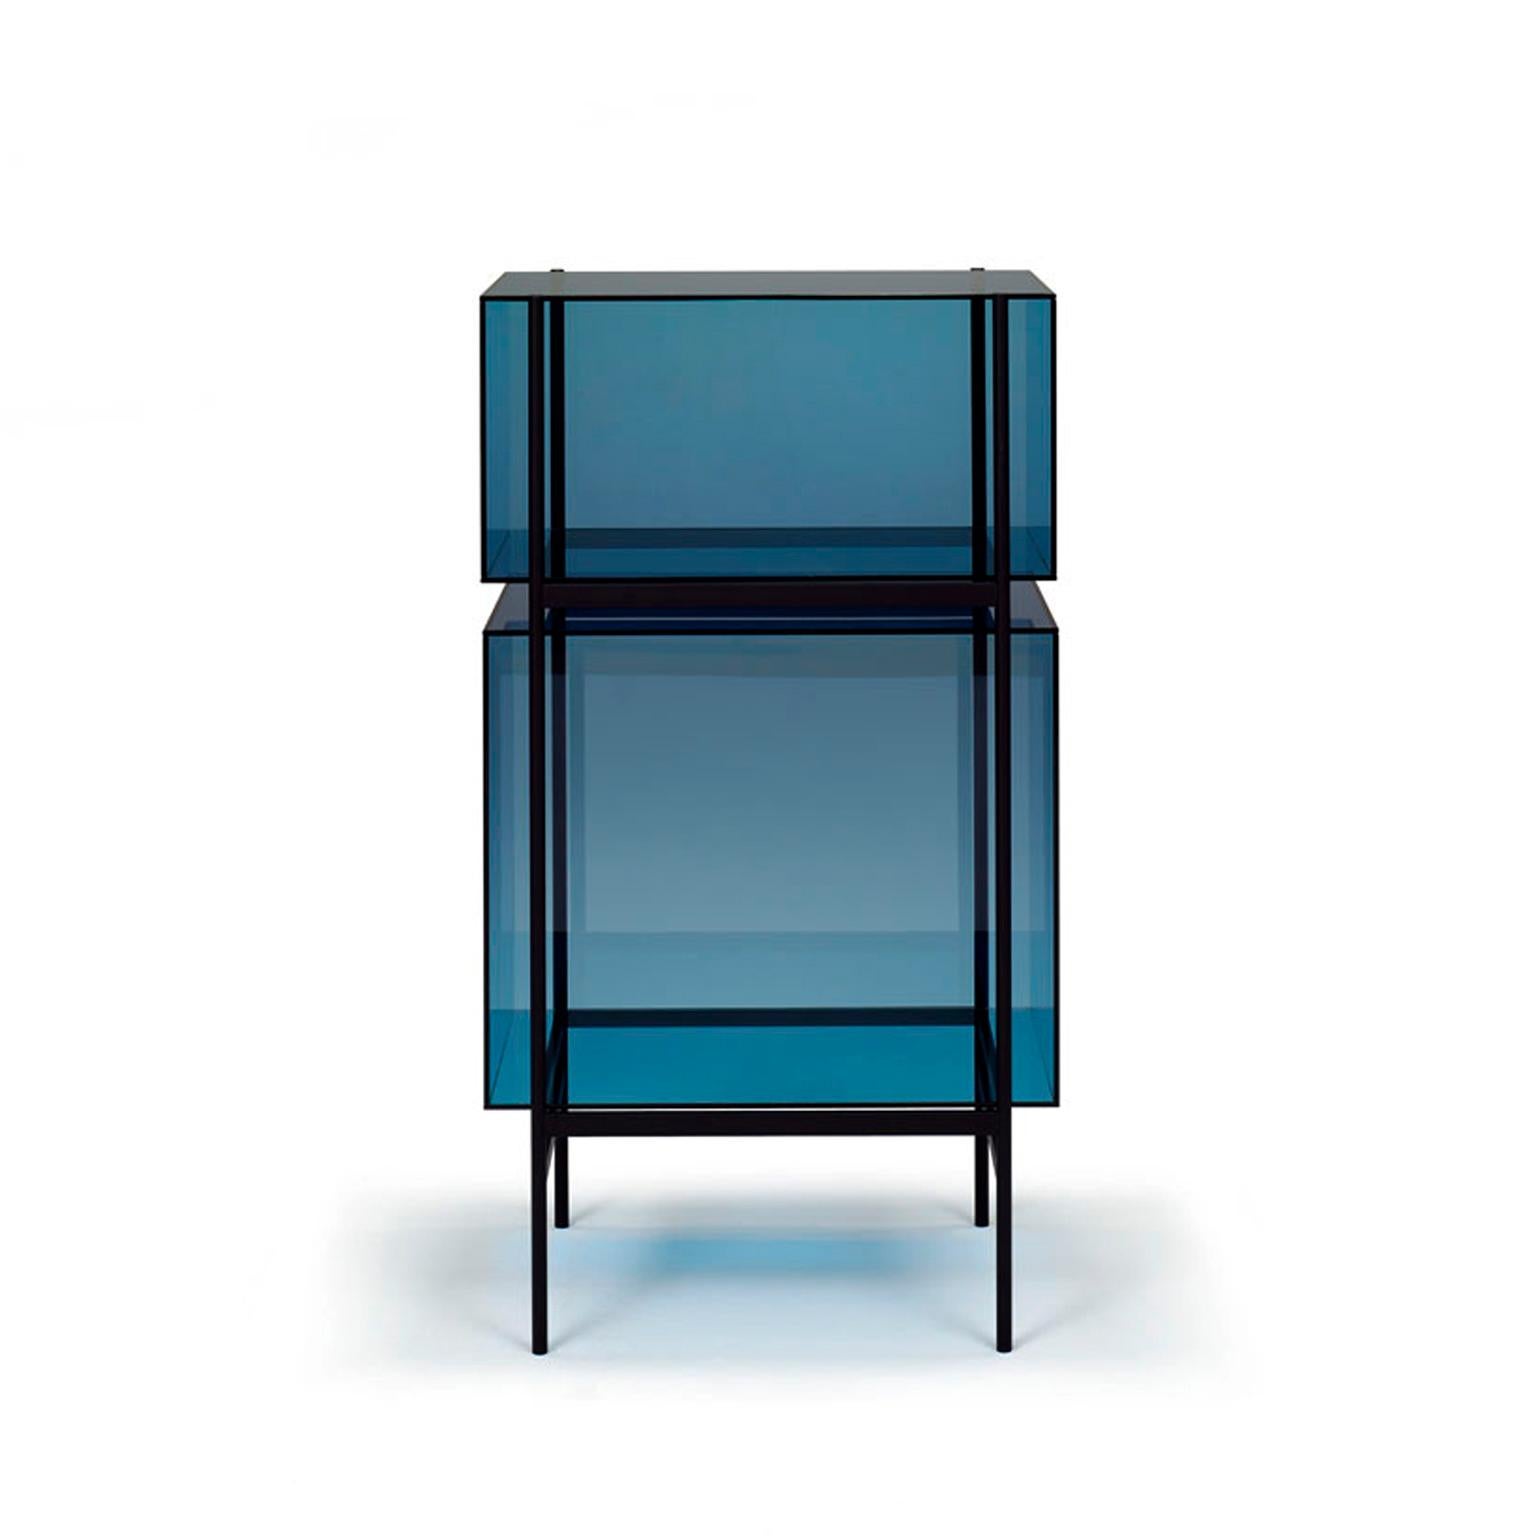 Lyn cabinet - European, Minimalist, blue, black base, German, cabinet, 21st century, small size

Studio Visser & Meijwaard describe their conception of lyn as a “graphic interplay between glass and the metal frameworks”. The doorless and diverse